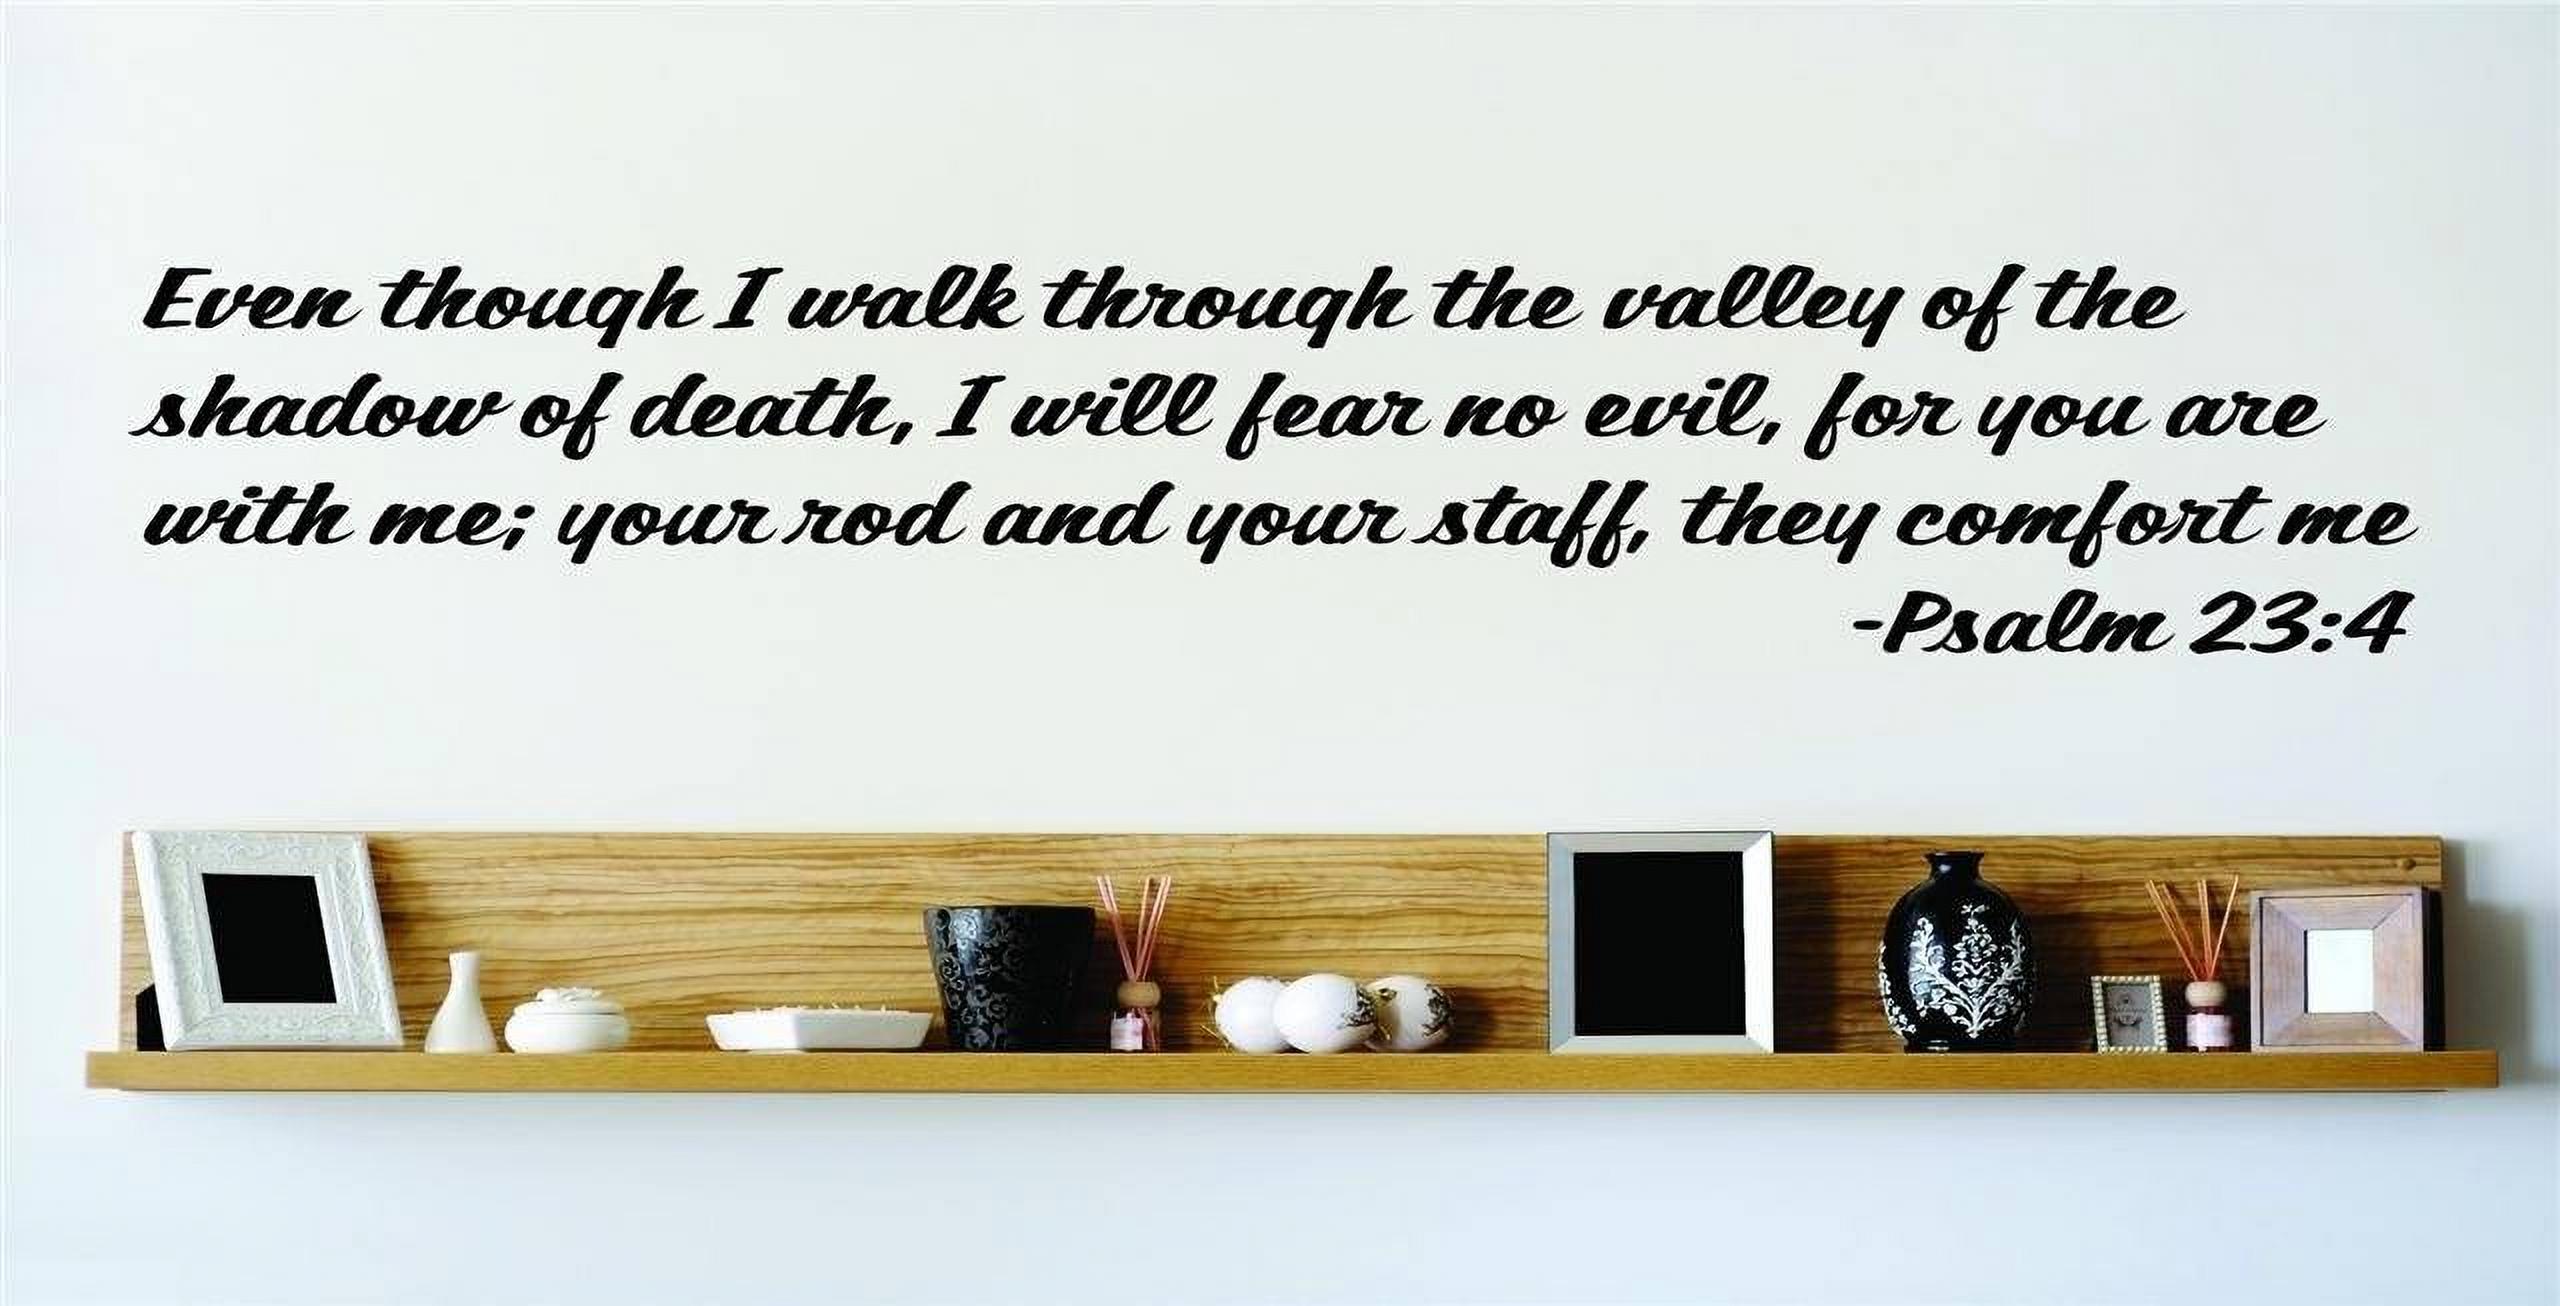 Custom Designs Even Though I Walk Through The Valley Of The Shadow Of Death, I Will Fear No Evil Psalm 234 Bible Quote 15x15 - image 1 of 1